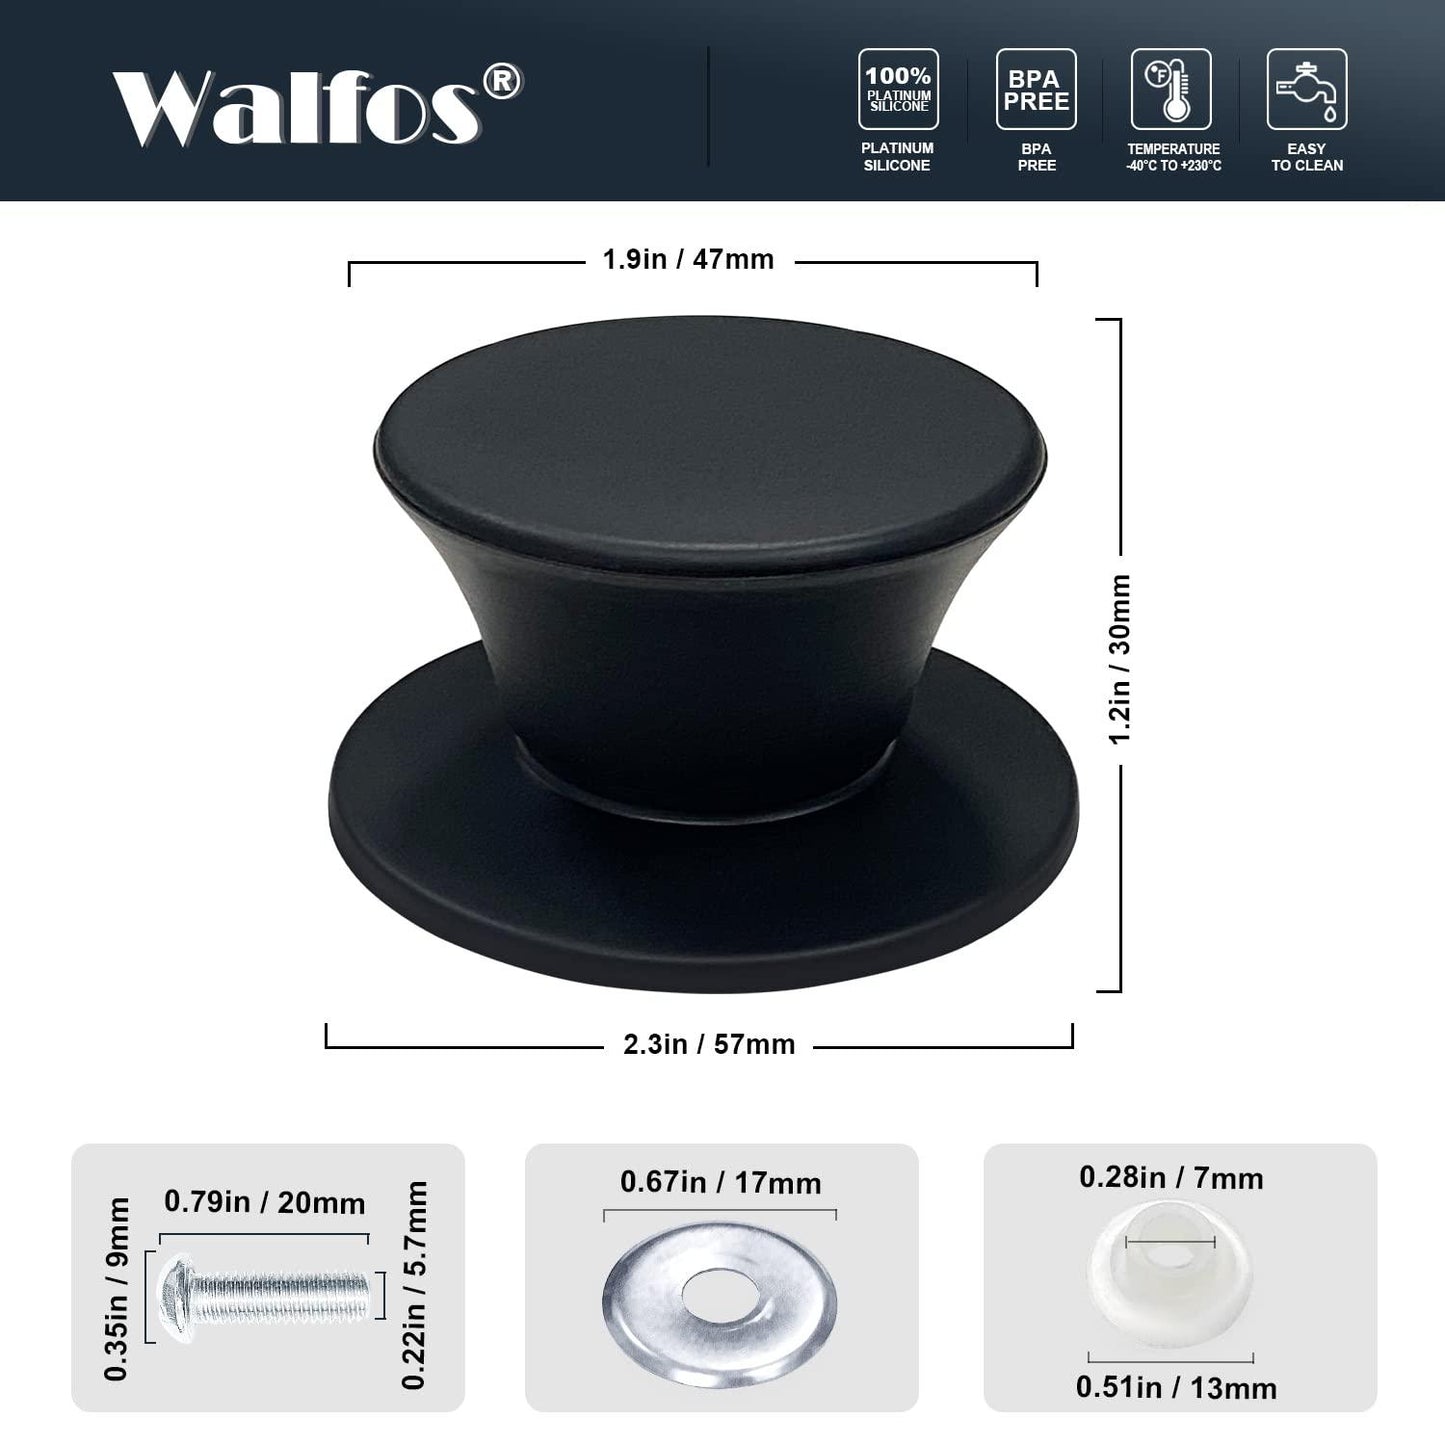 Walfos Universal Silicone Pot Lid Replacement Knob, Heat Resistant Pan Lid Holding Handles, Dishwasher Safe, BPA Free, Great for Slow Cookers, Skillets and Kitchen Cookware Covers, 1 Pack - CookCave